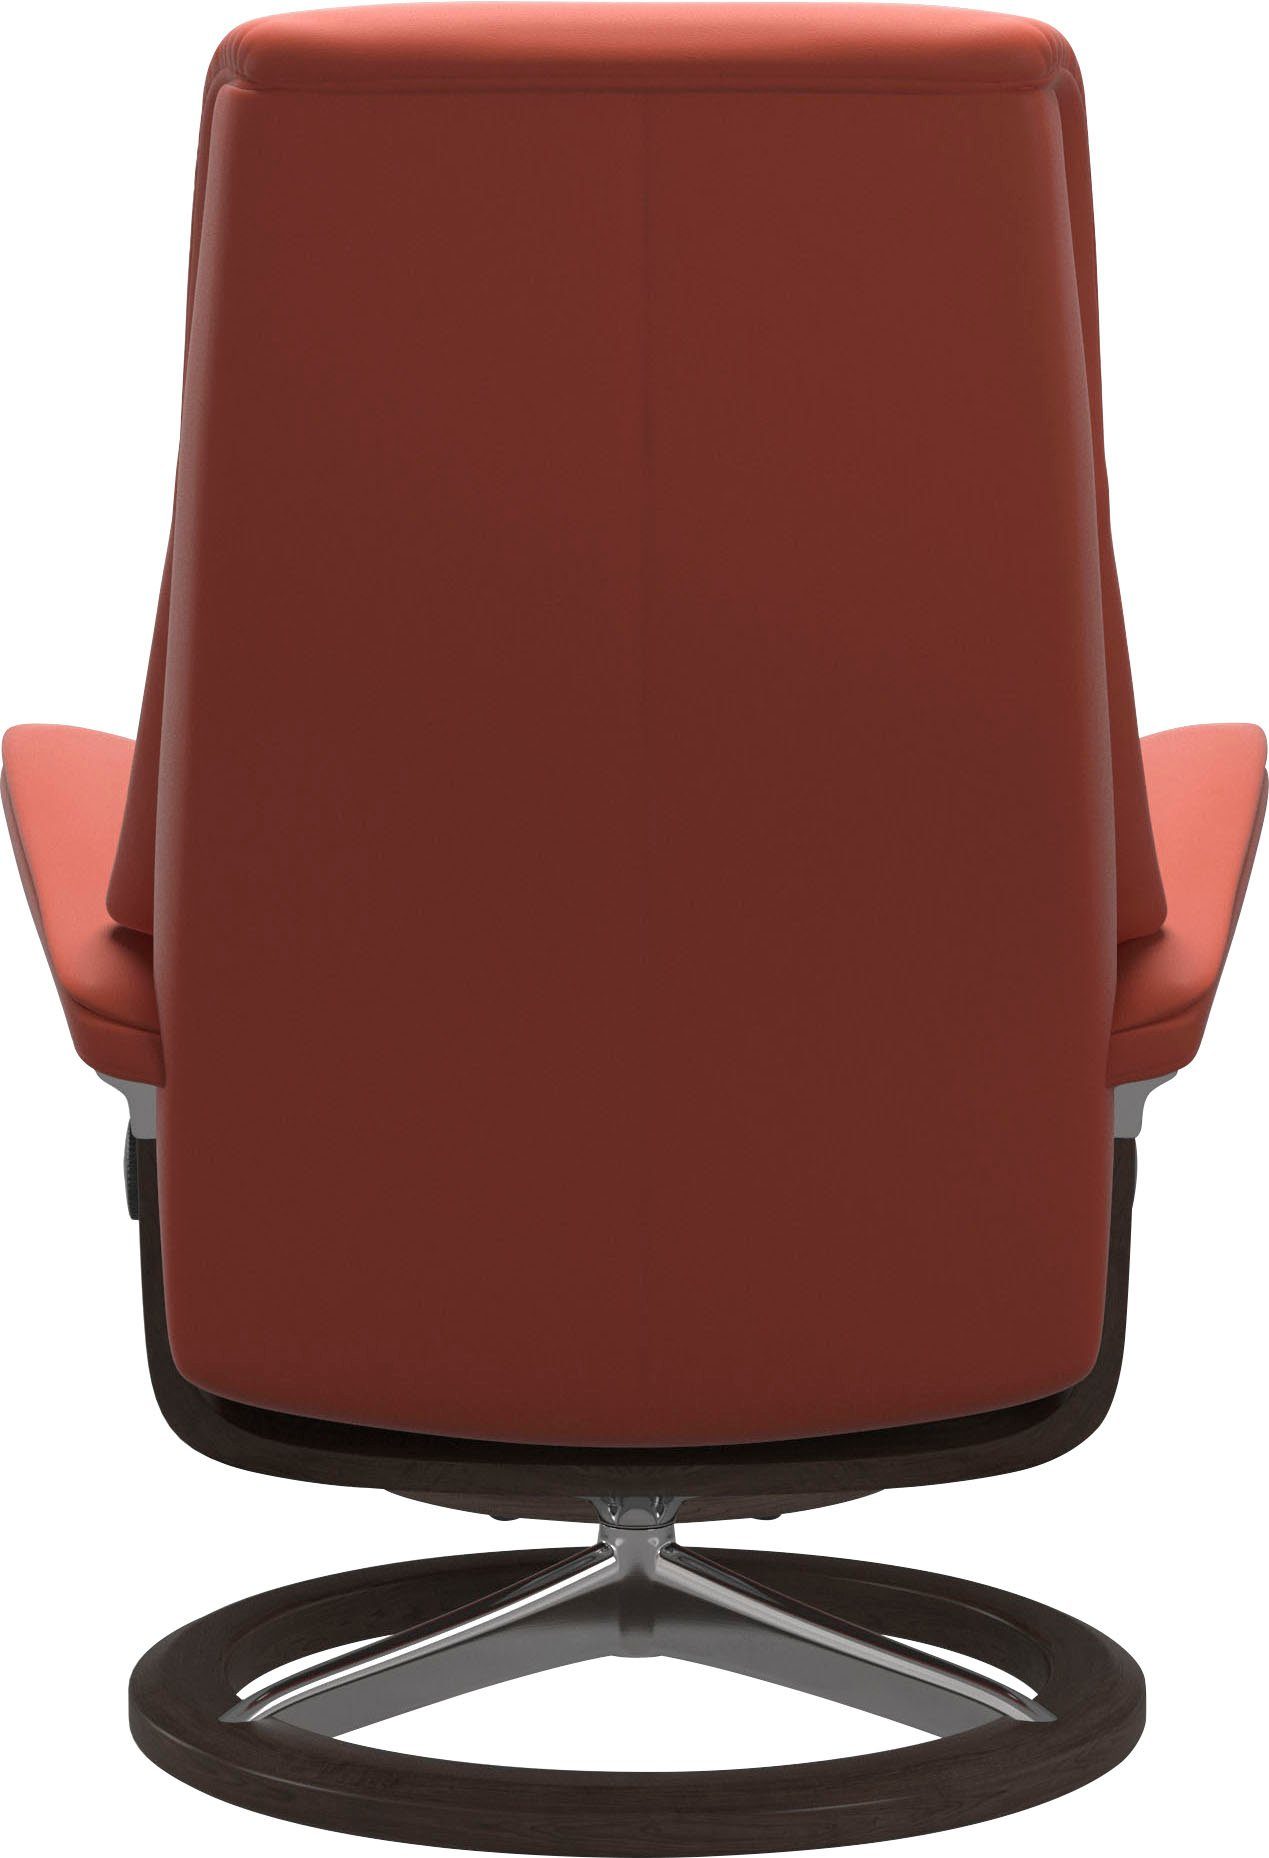 Signature Stressless® Größe Relaxsessel L,Gestell mit Base, View, Wenge